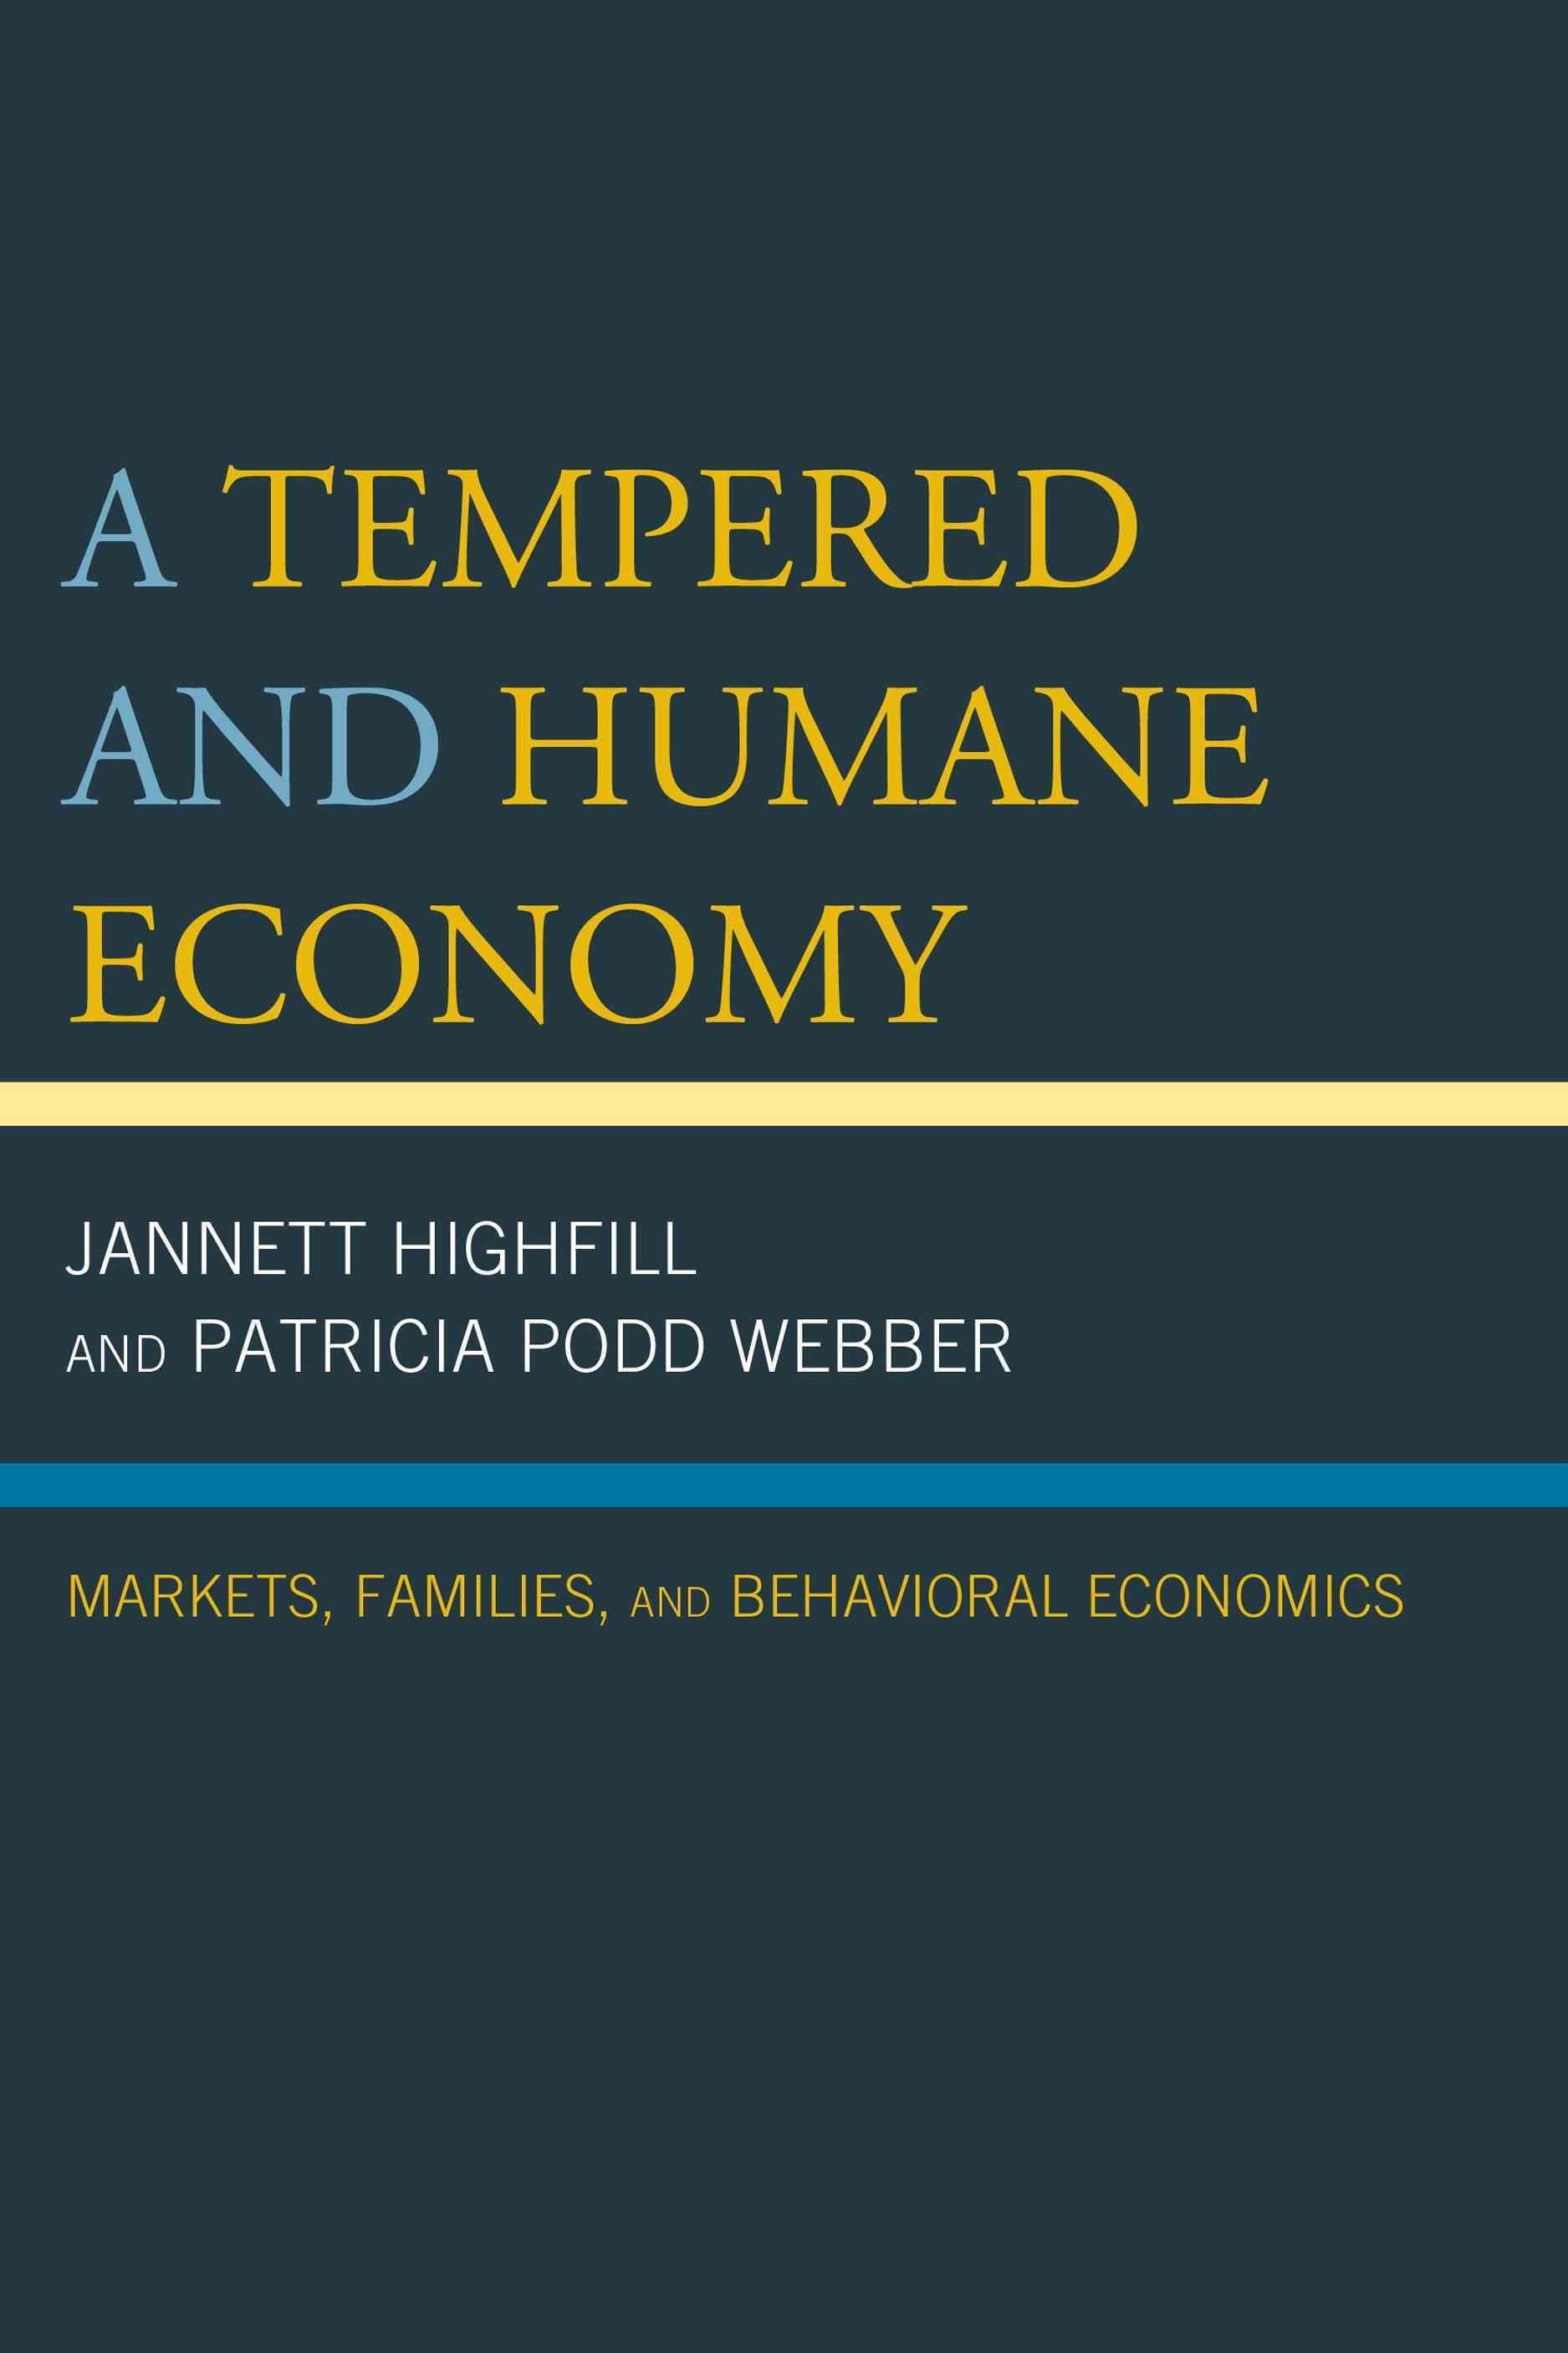 A Tempered and Humane Economy